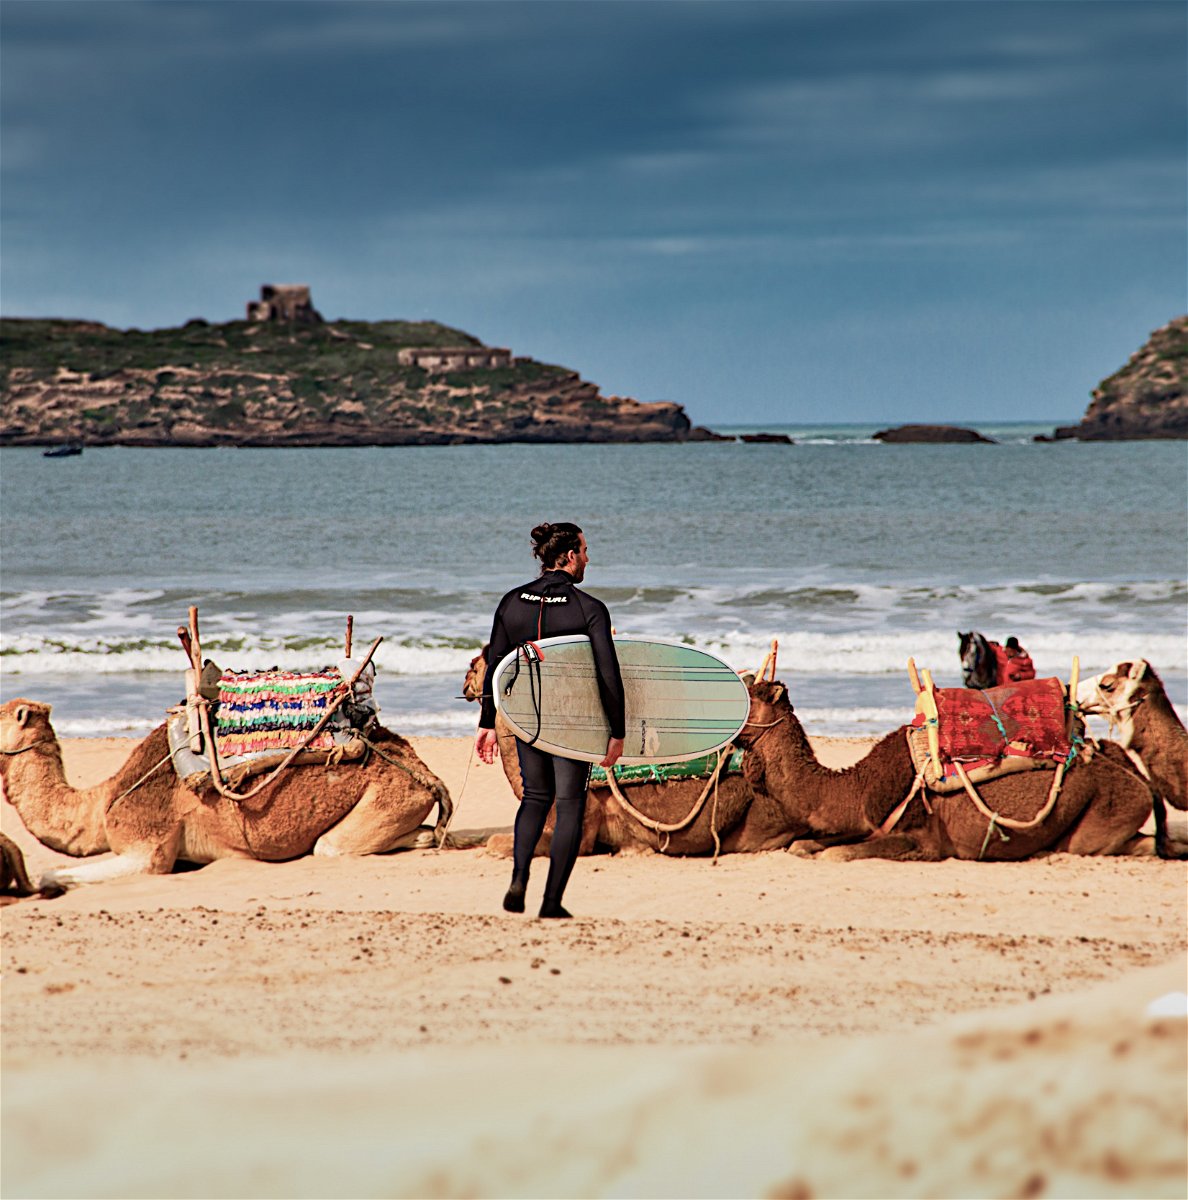 man walking on beach with camels